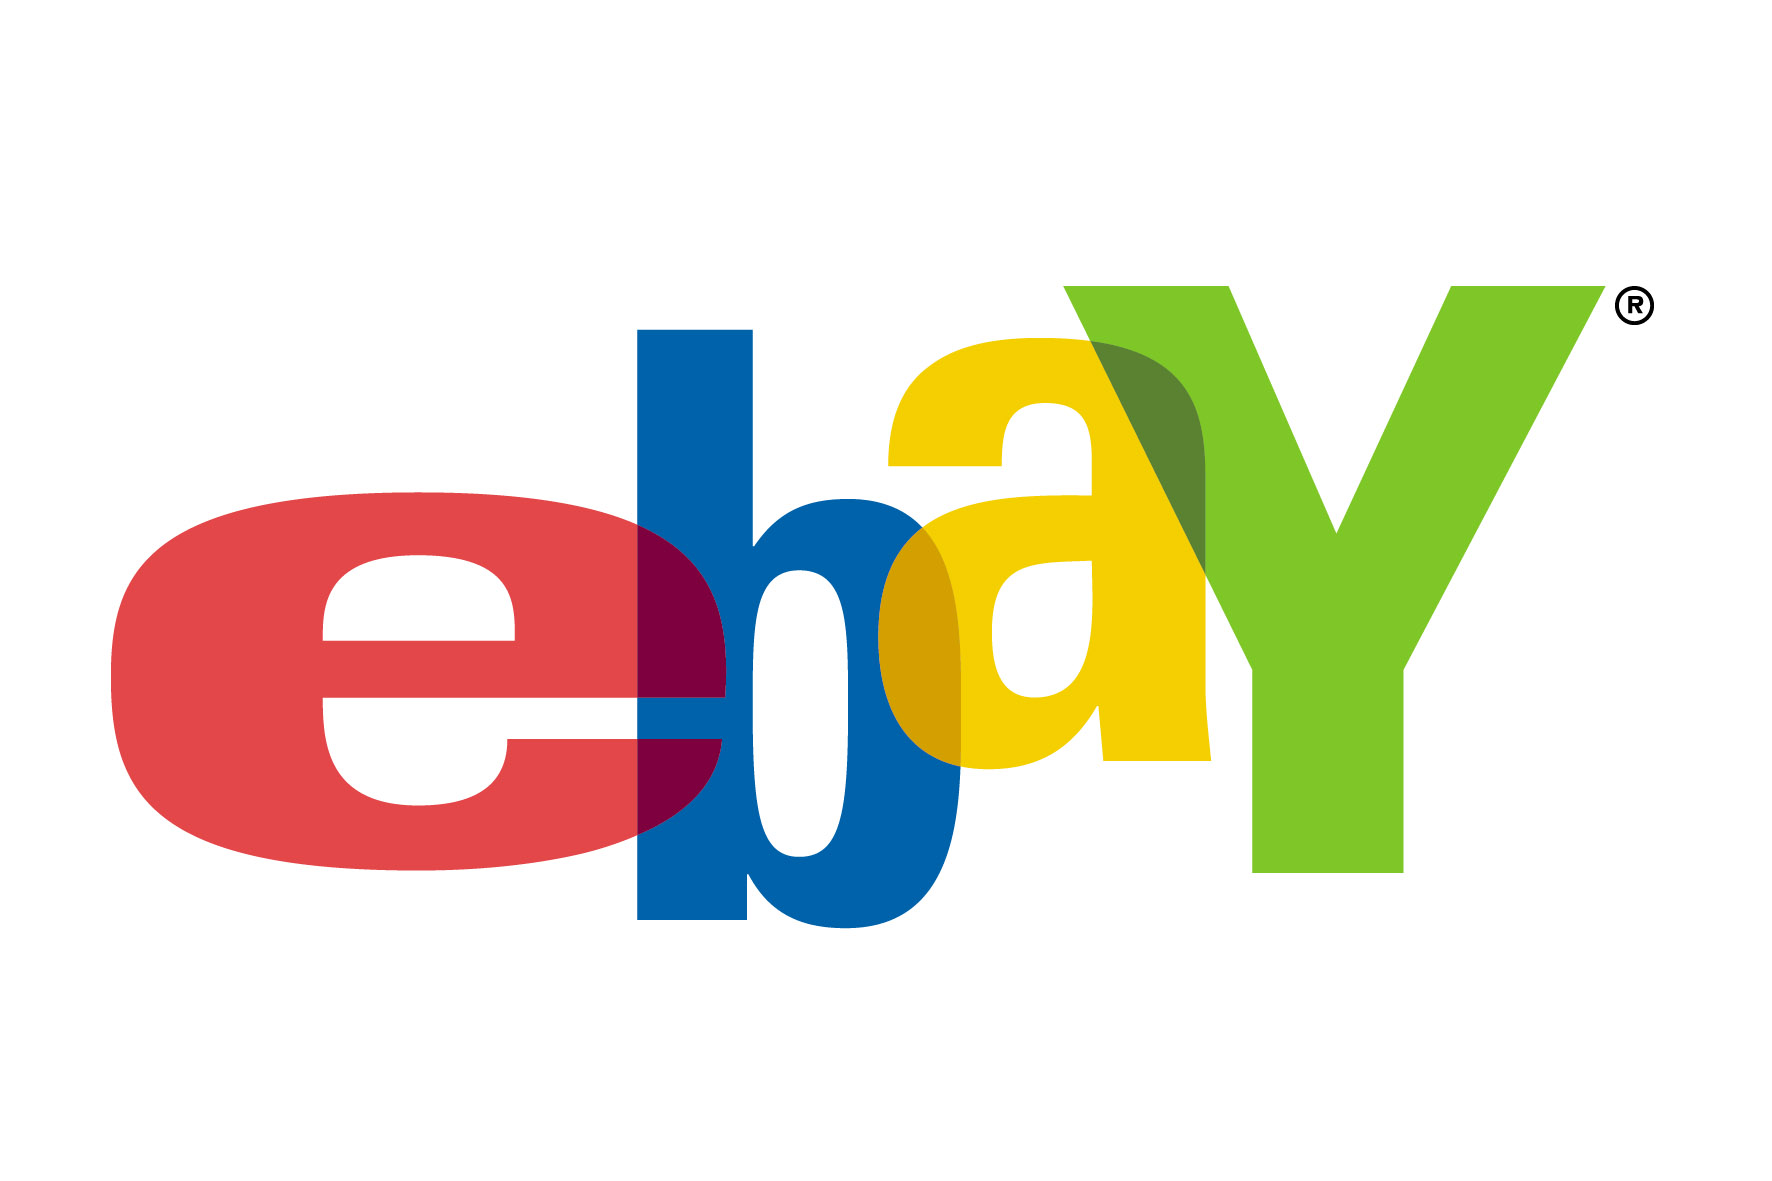 eBay: The Place To Find Anything